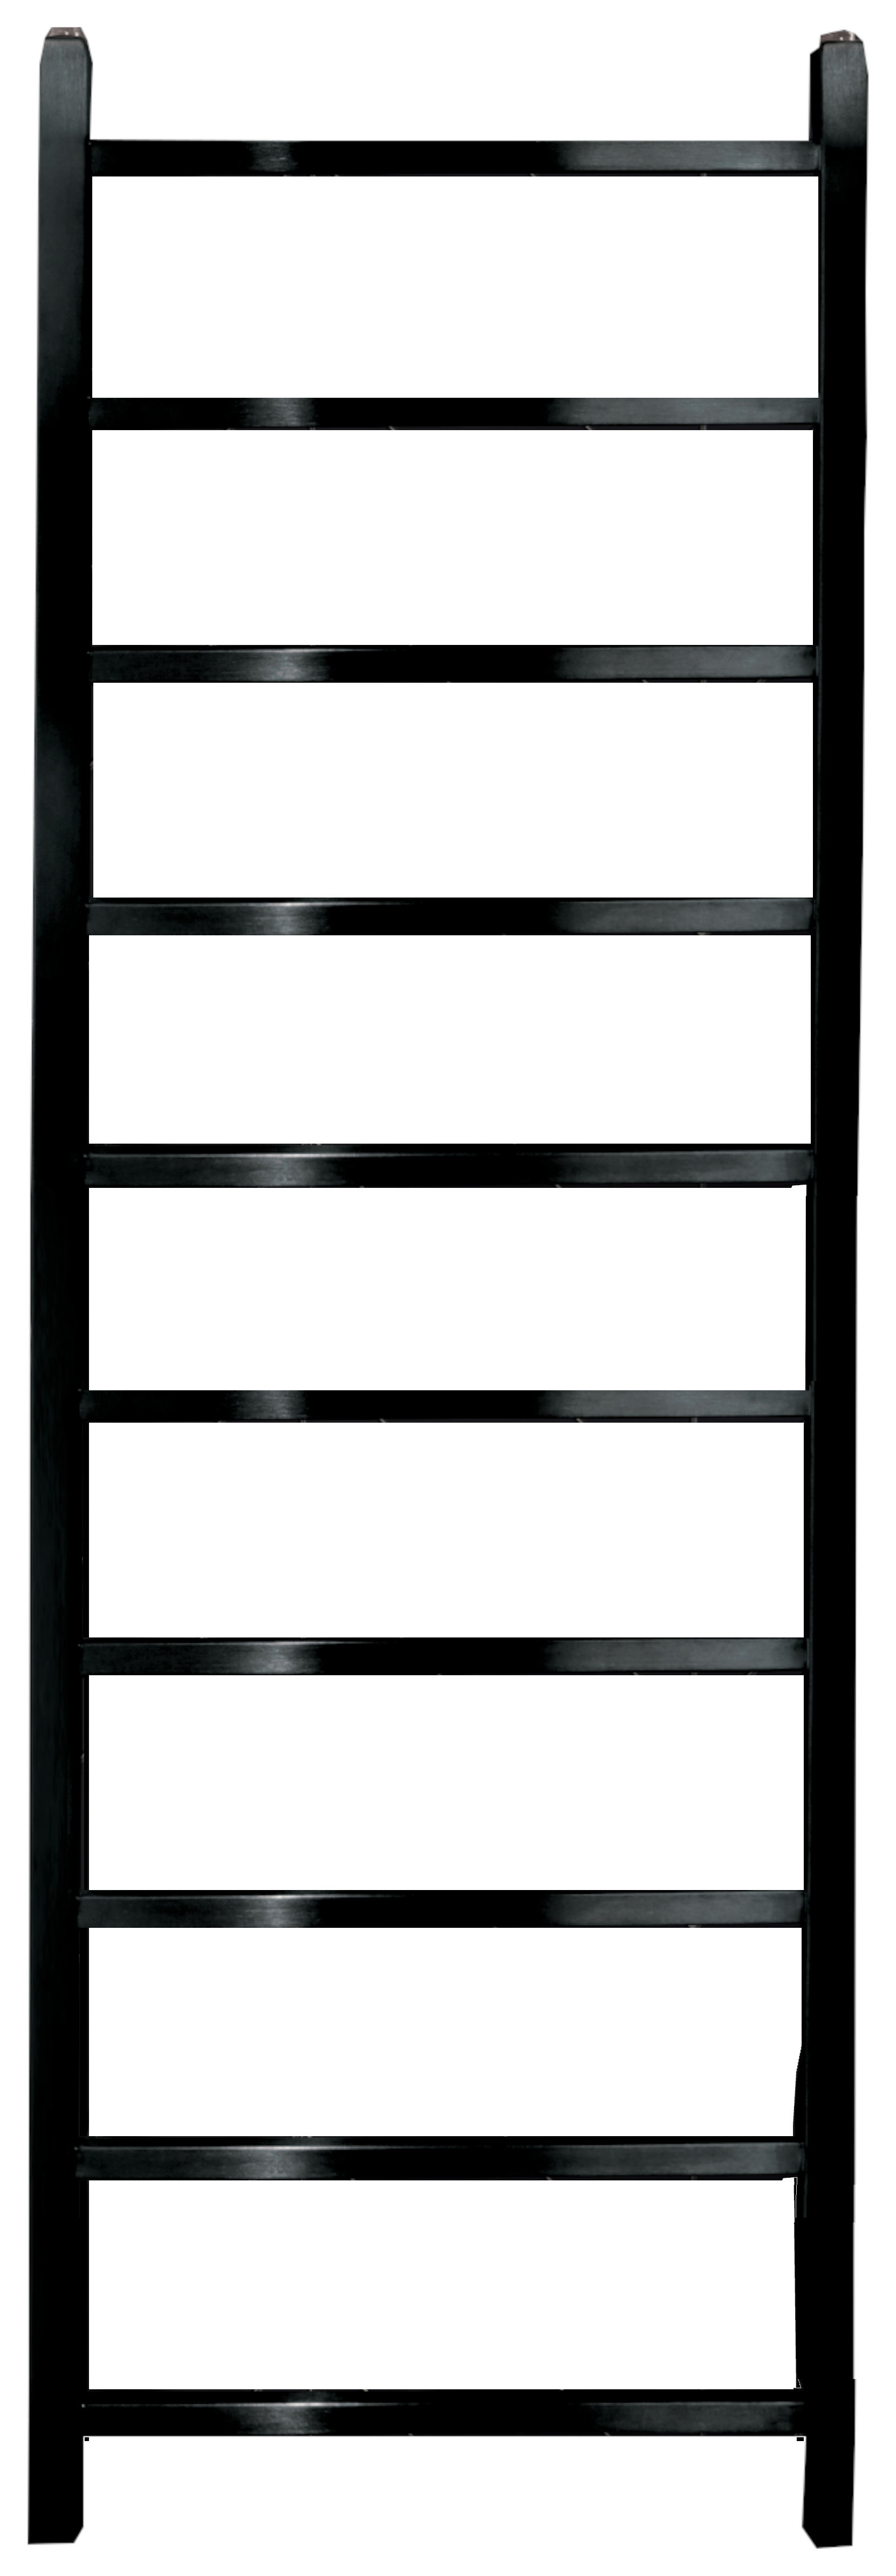 Towelrads Diva Brushed Black Chrome Dry Electric Non Thermostatic Towel Radiator - 1500 x 500mm